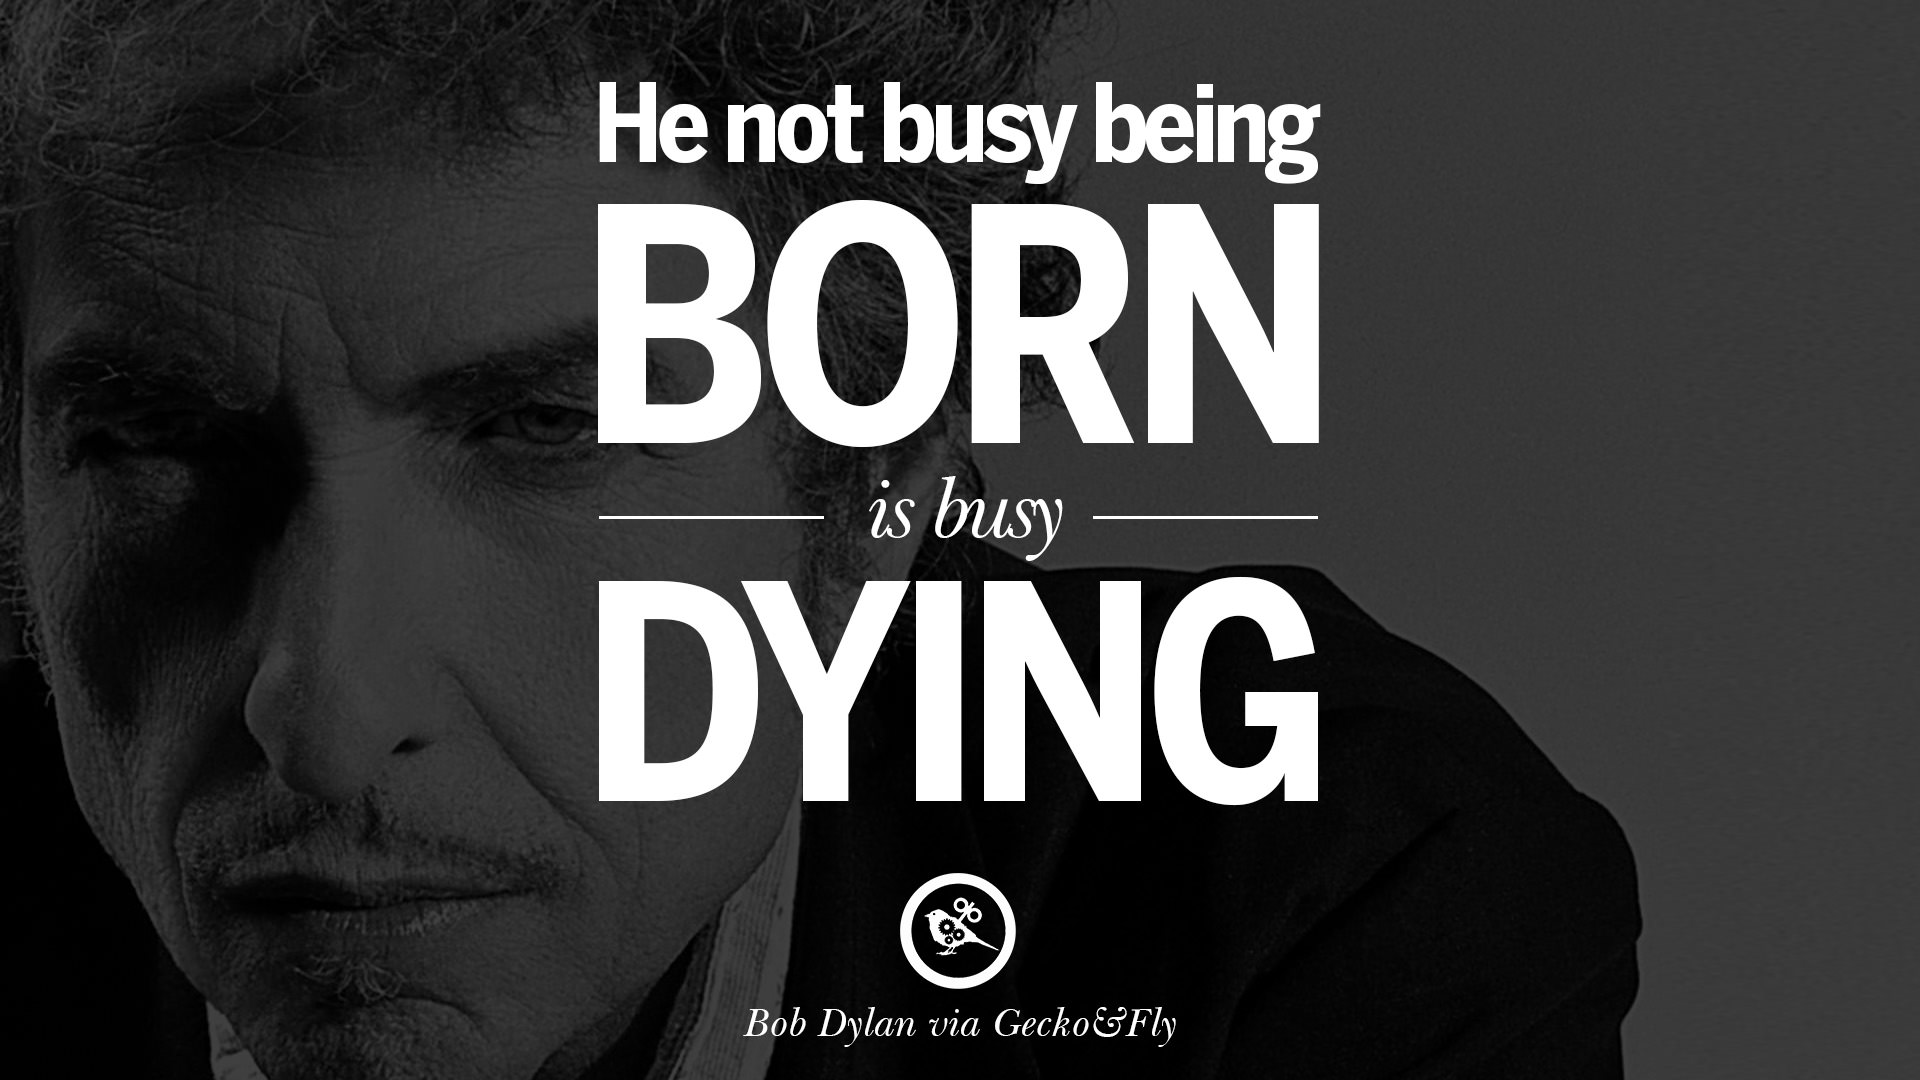 27 Inspirational Bob Dylan Quotes on Freedom, Love via His 